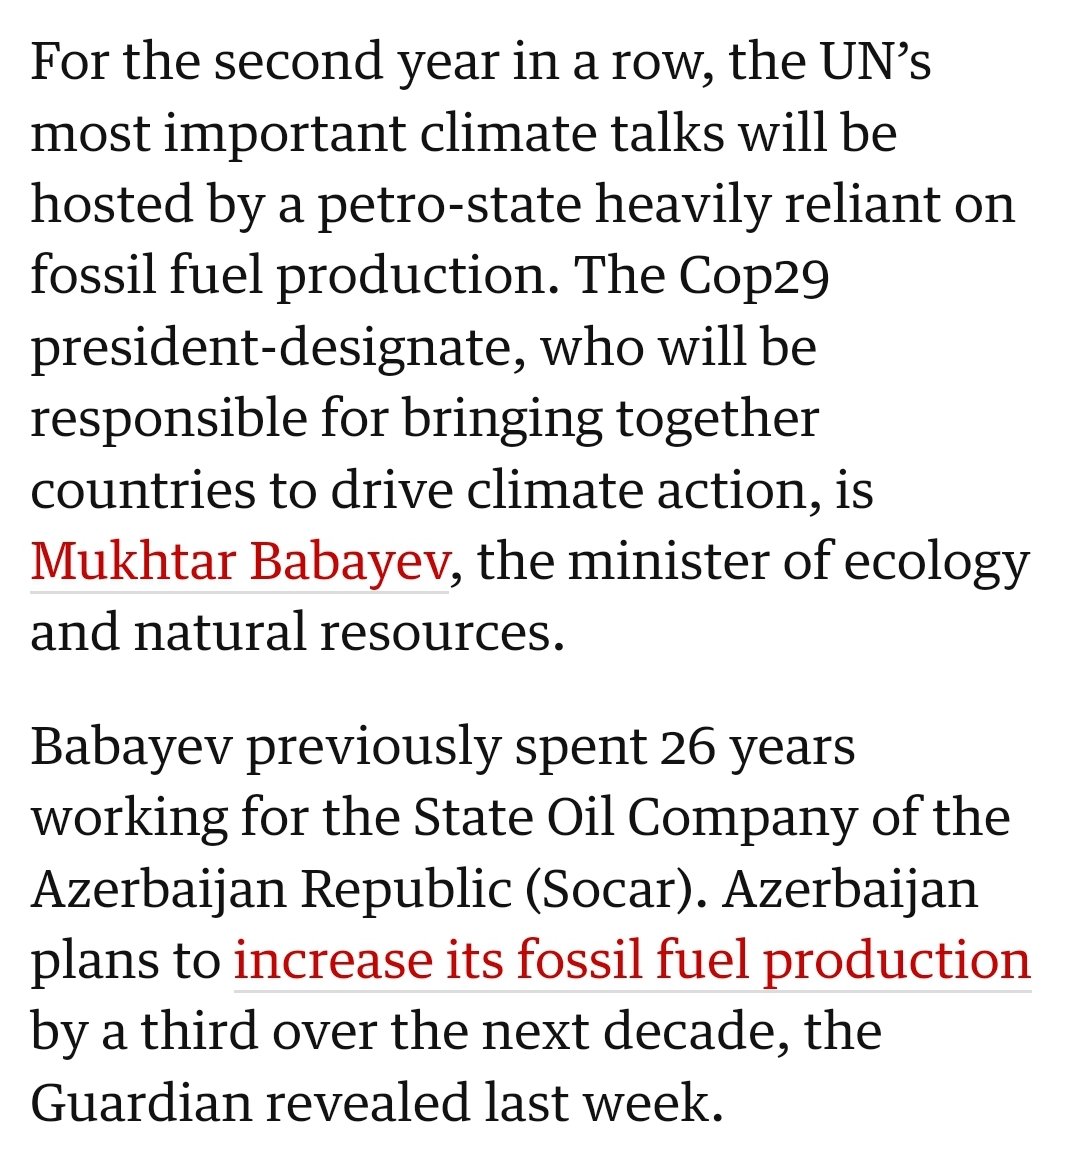 Preparing for COP29 in Azerbaijan? You can use the same playbook. Once again, the critical climate negotiations will be led by an oil boss from a petrostate, no doubt producing decision text littered with loopholes for polluters.